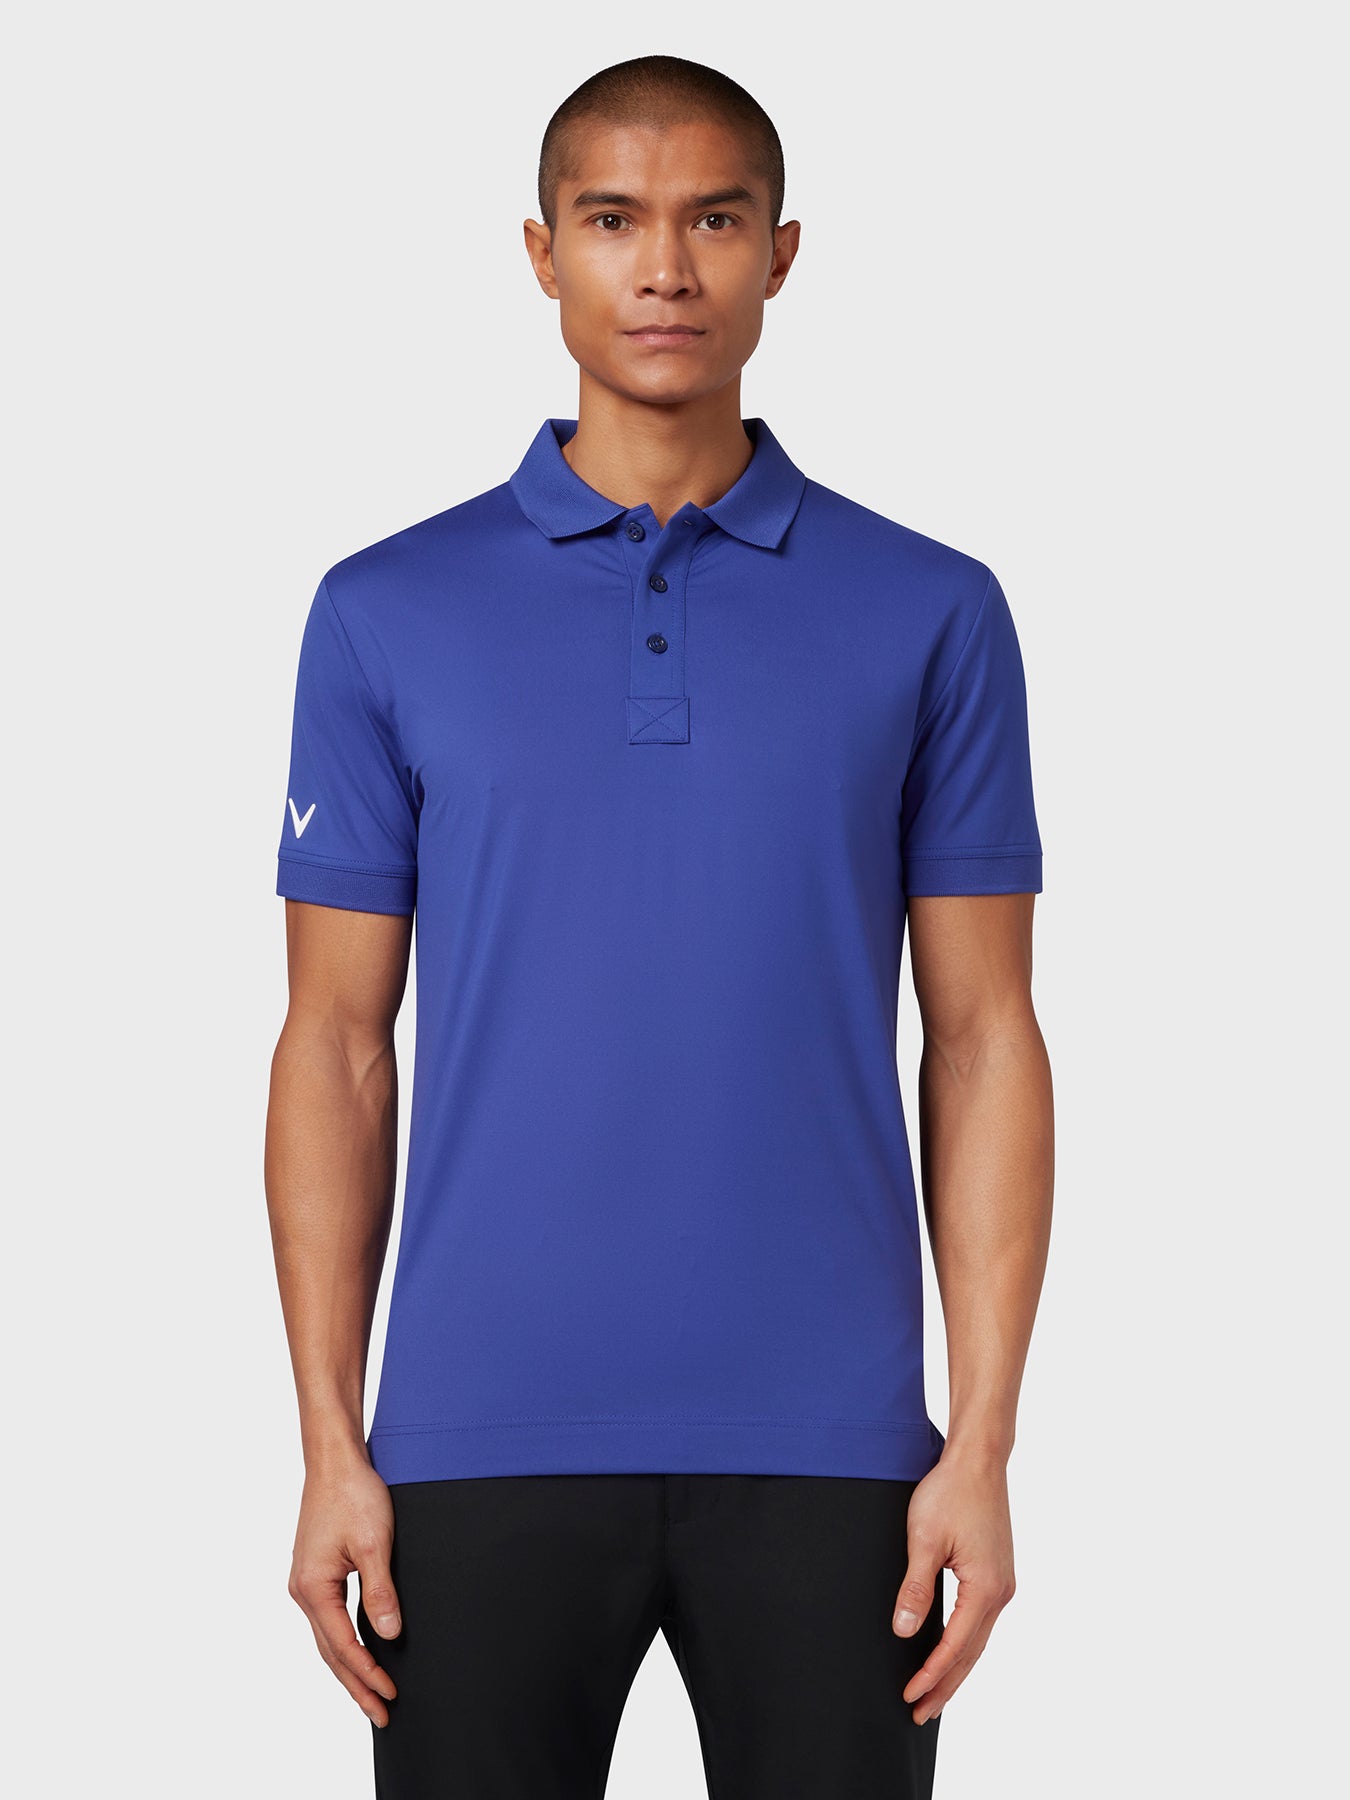 View X Series Solid Ribbed Polo In Clematis Blue Clematis Blue XS information